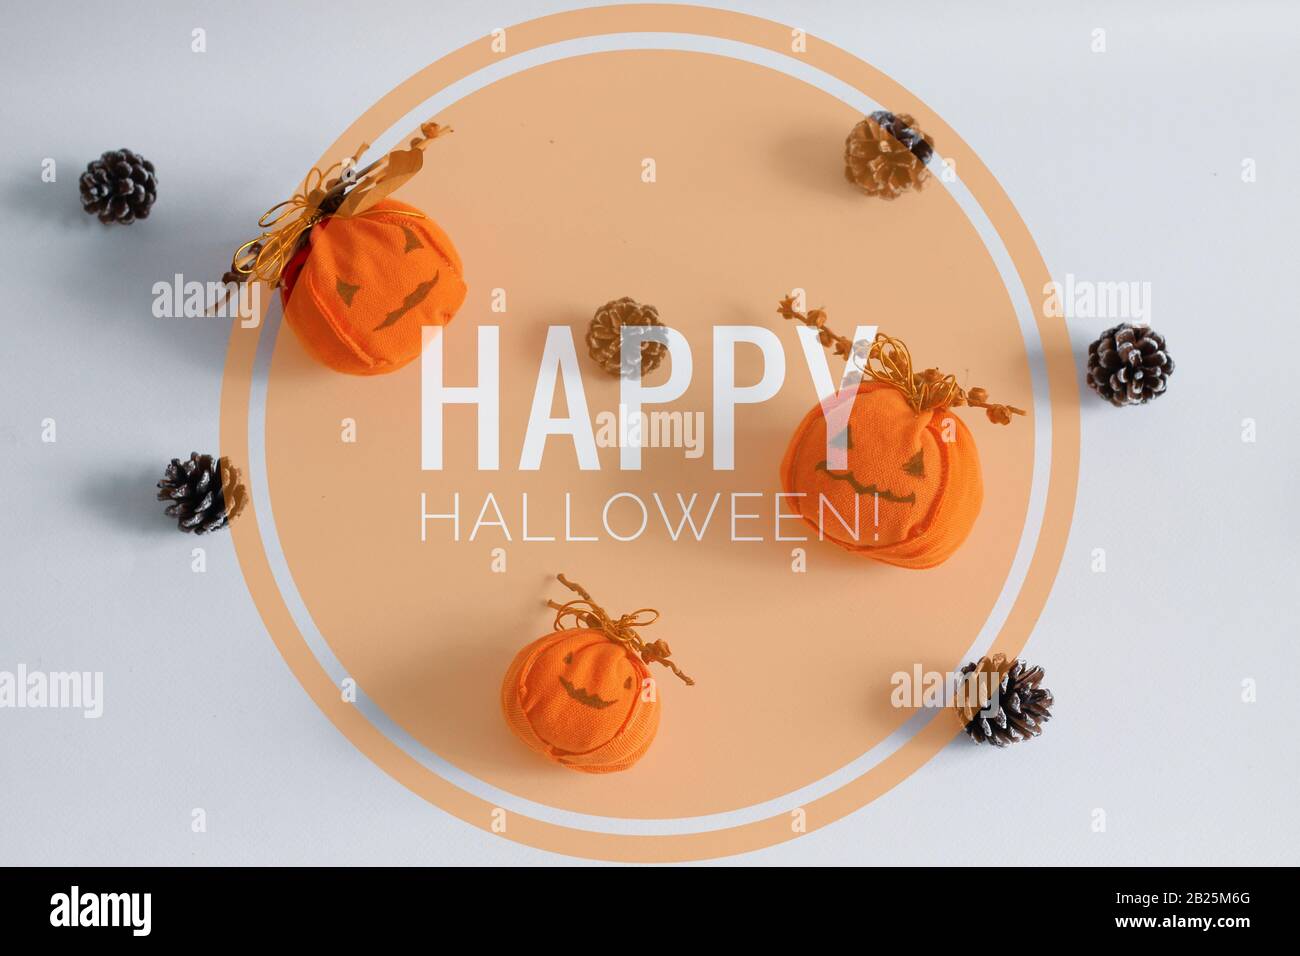 Happy Halloween greetings text against a cute jack o lantern design background Stock Photo